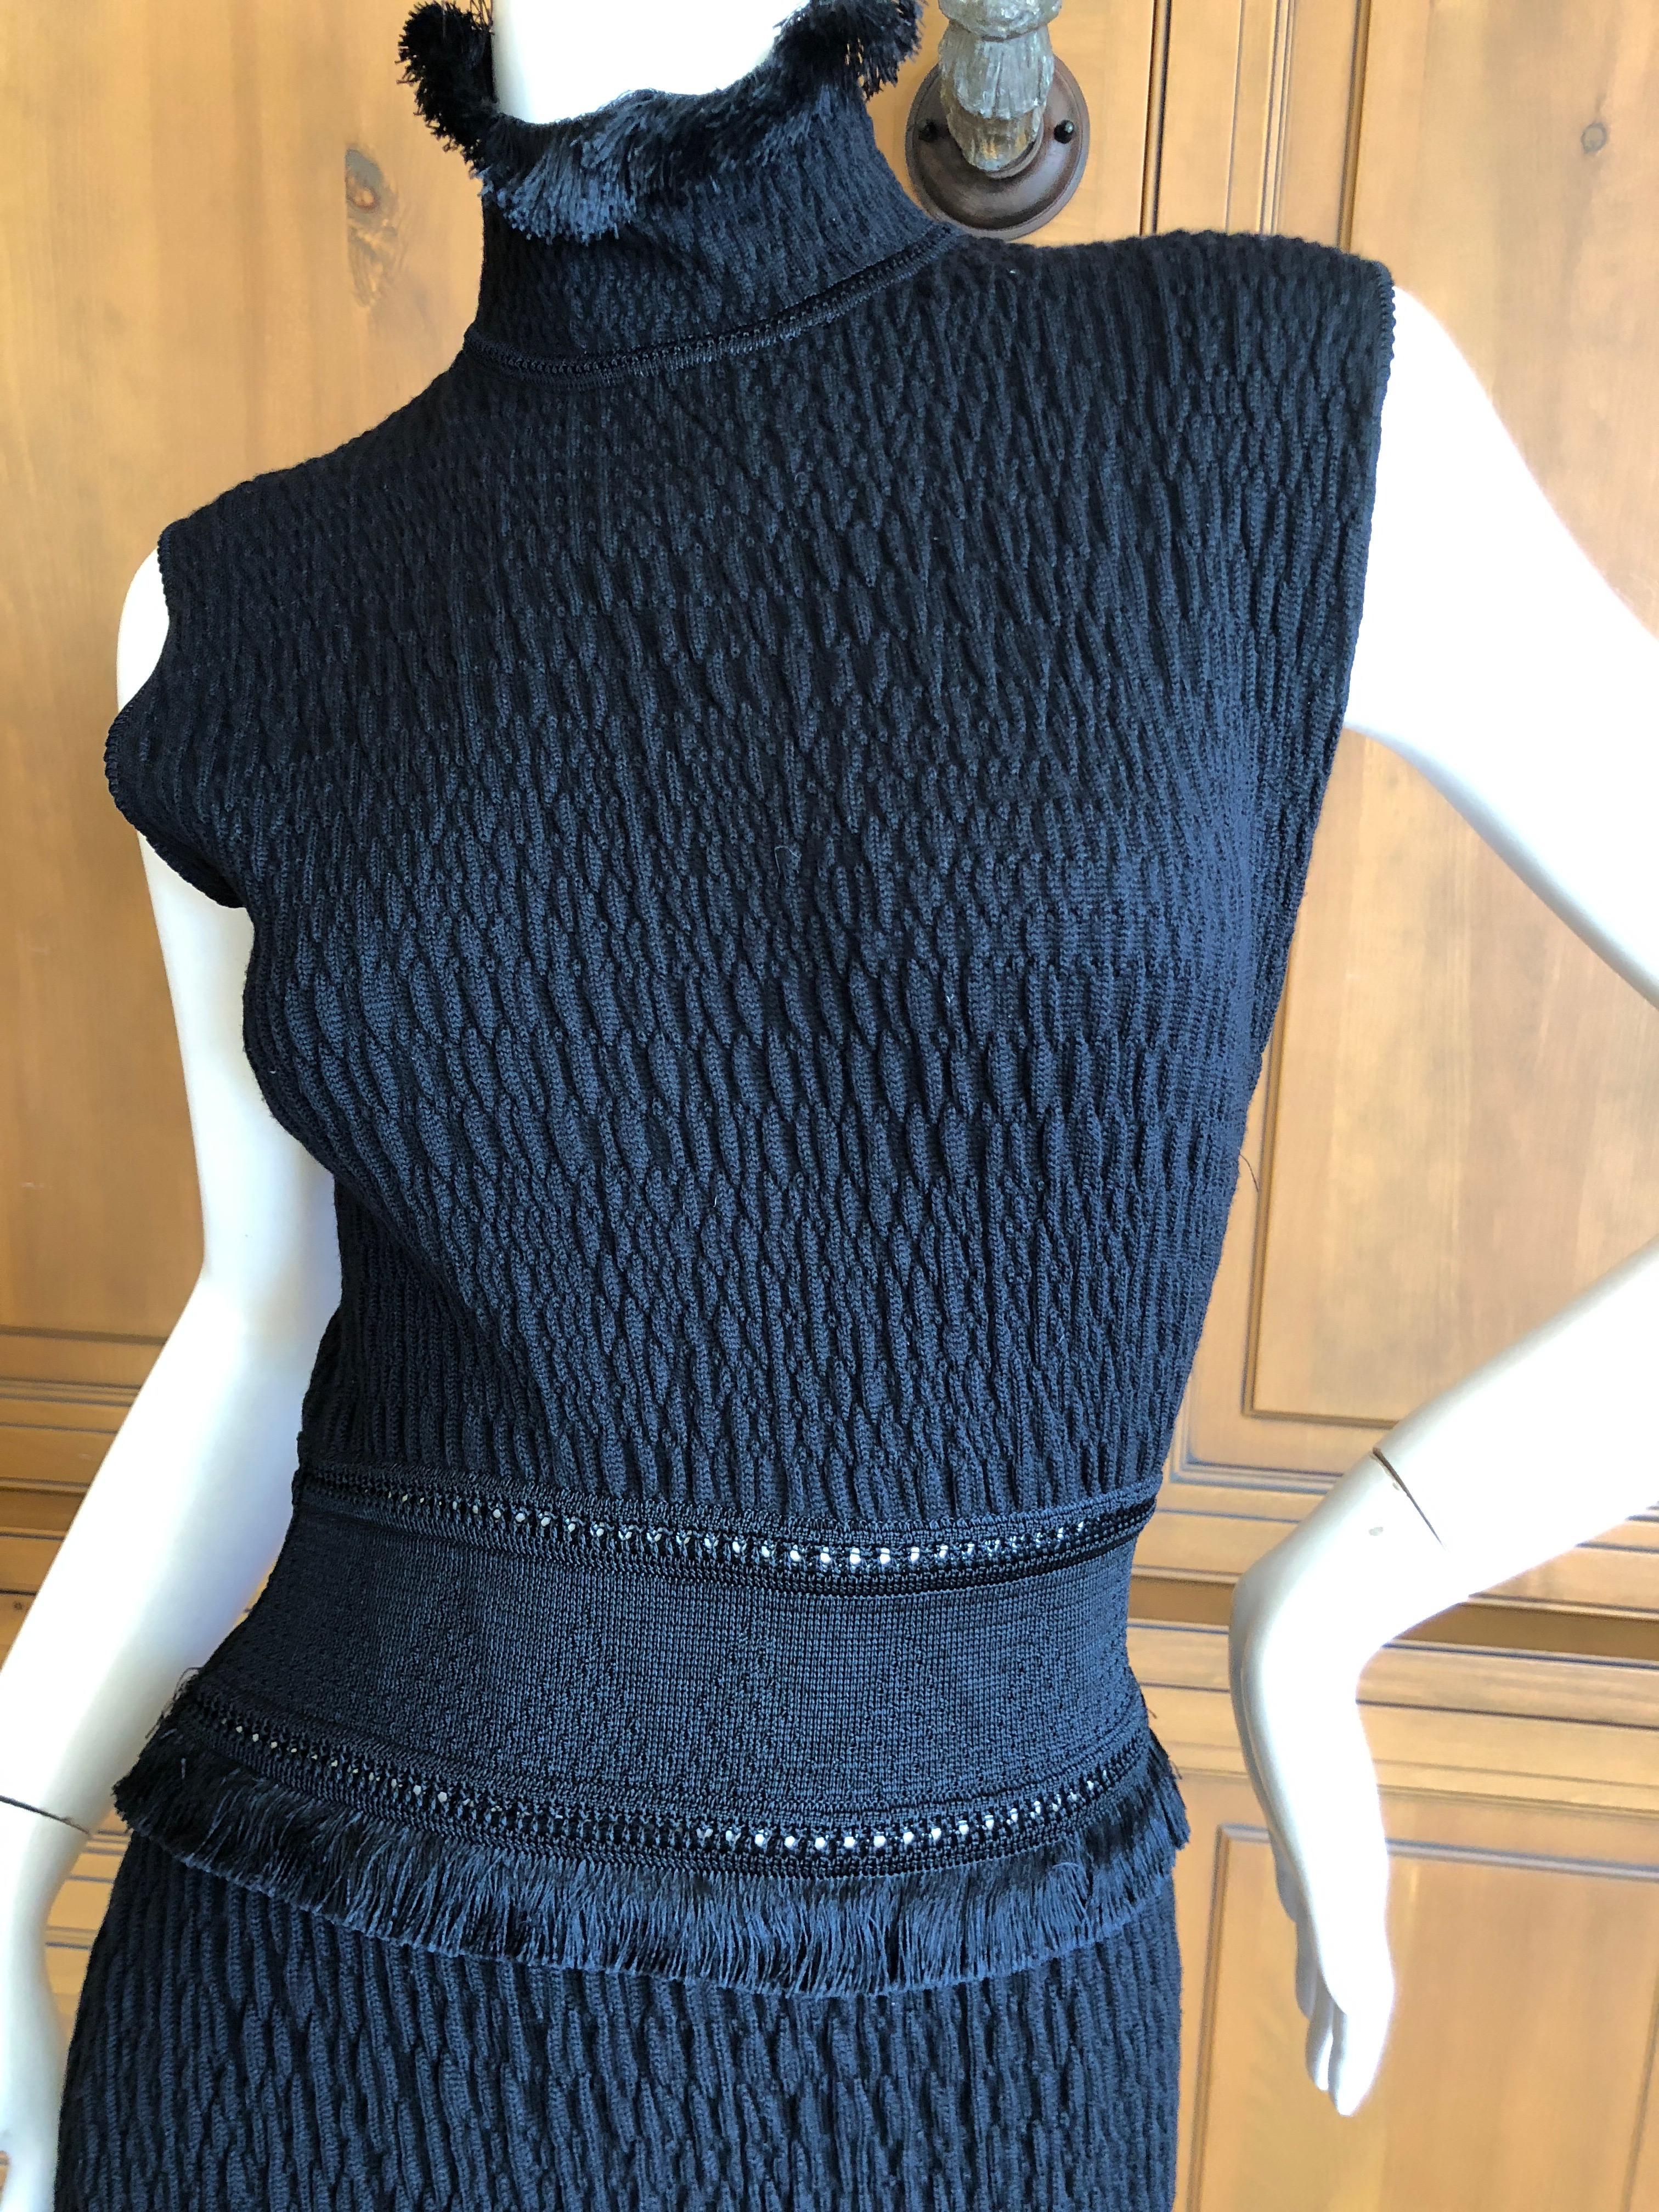 John Galliano Black Fringed Dress with Matching Wide Mink Collar Sweater, 1990s  In Excellent Condition For Sale In Cloverdale, CA